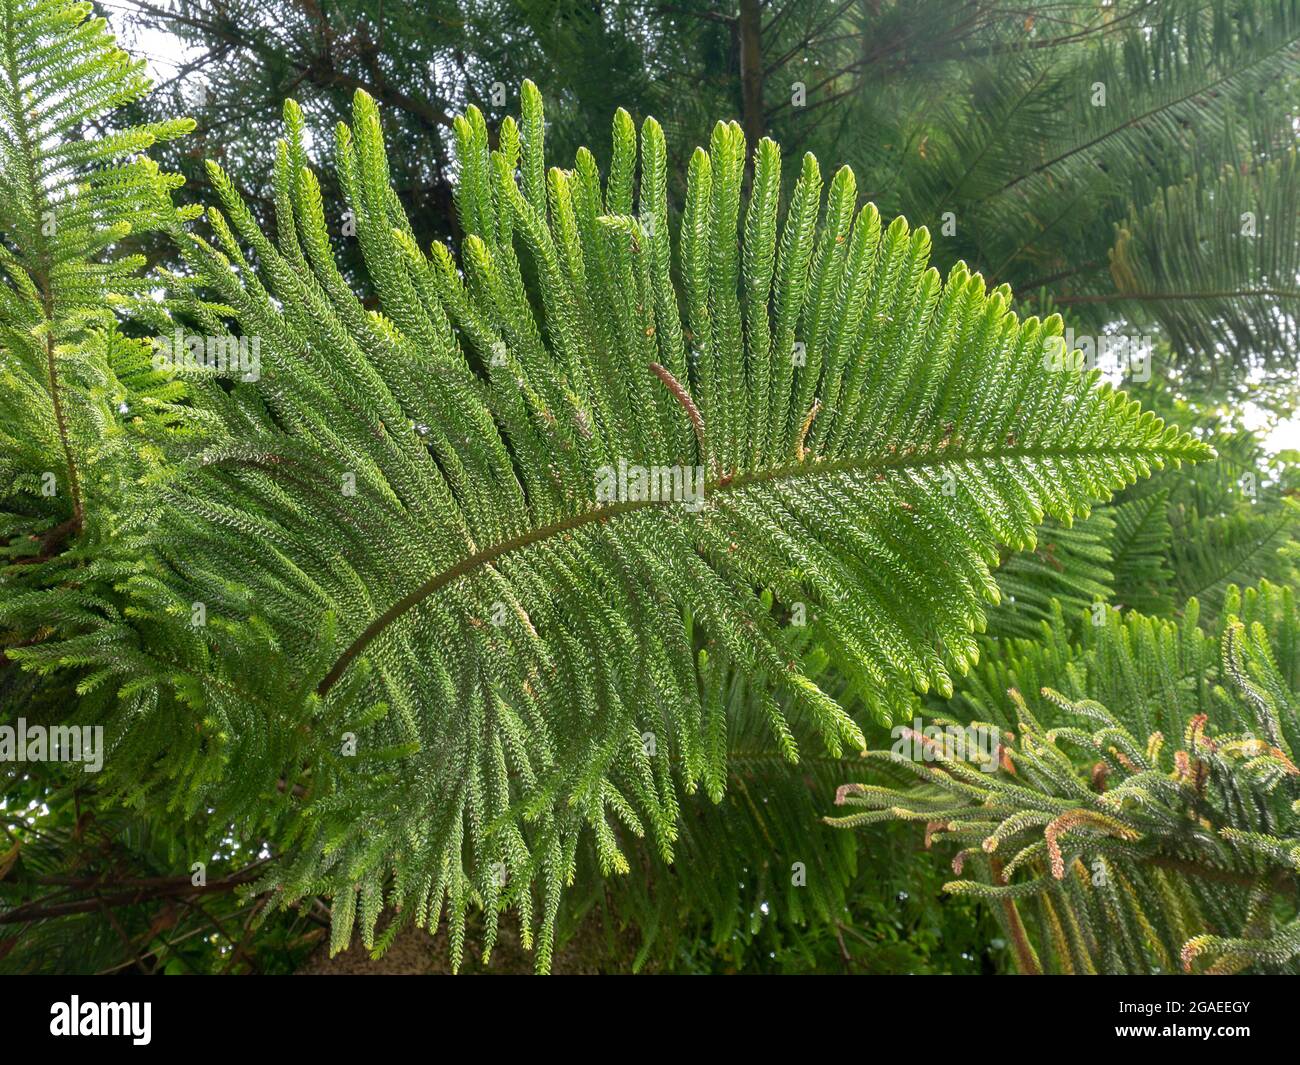 Araucaria columnaris the coral reef or Cook araucaria branch with horizontal branchlets Stock Photo